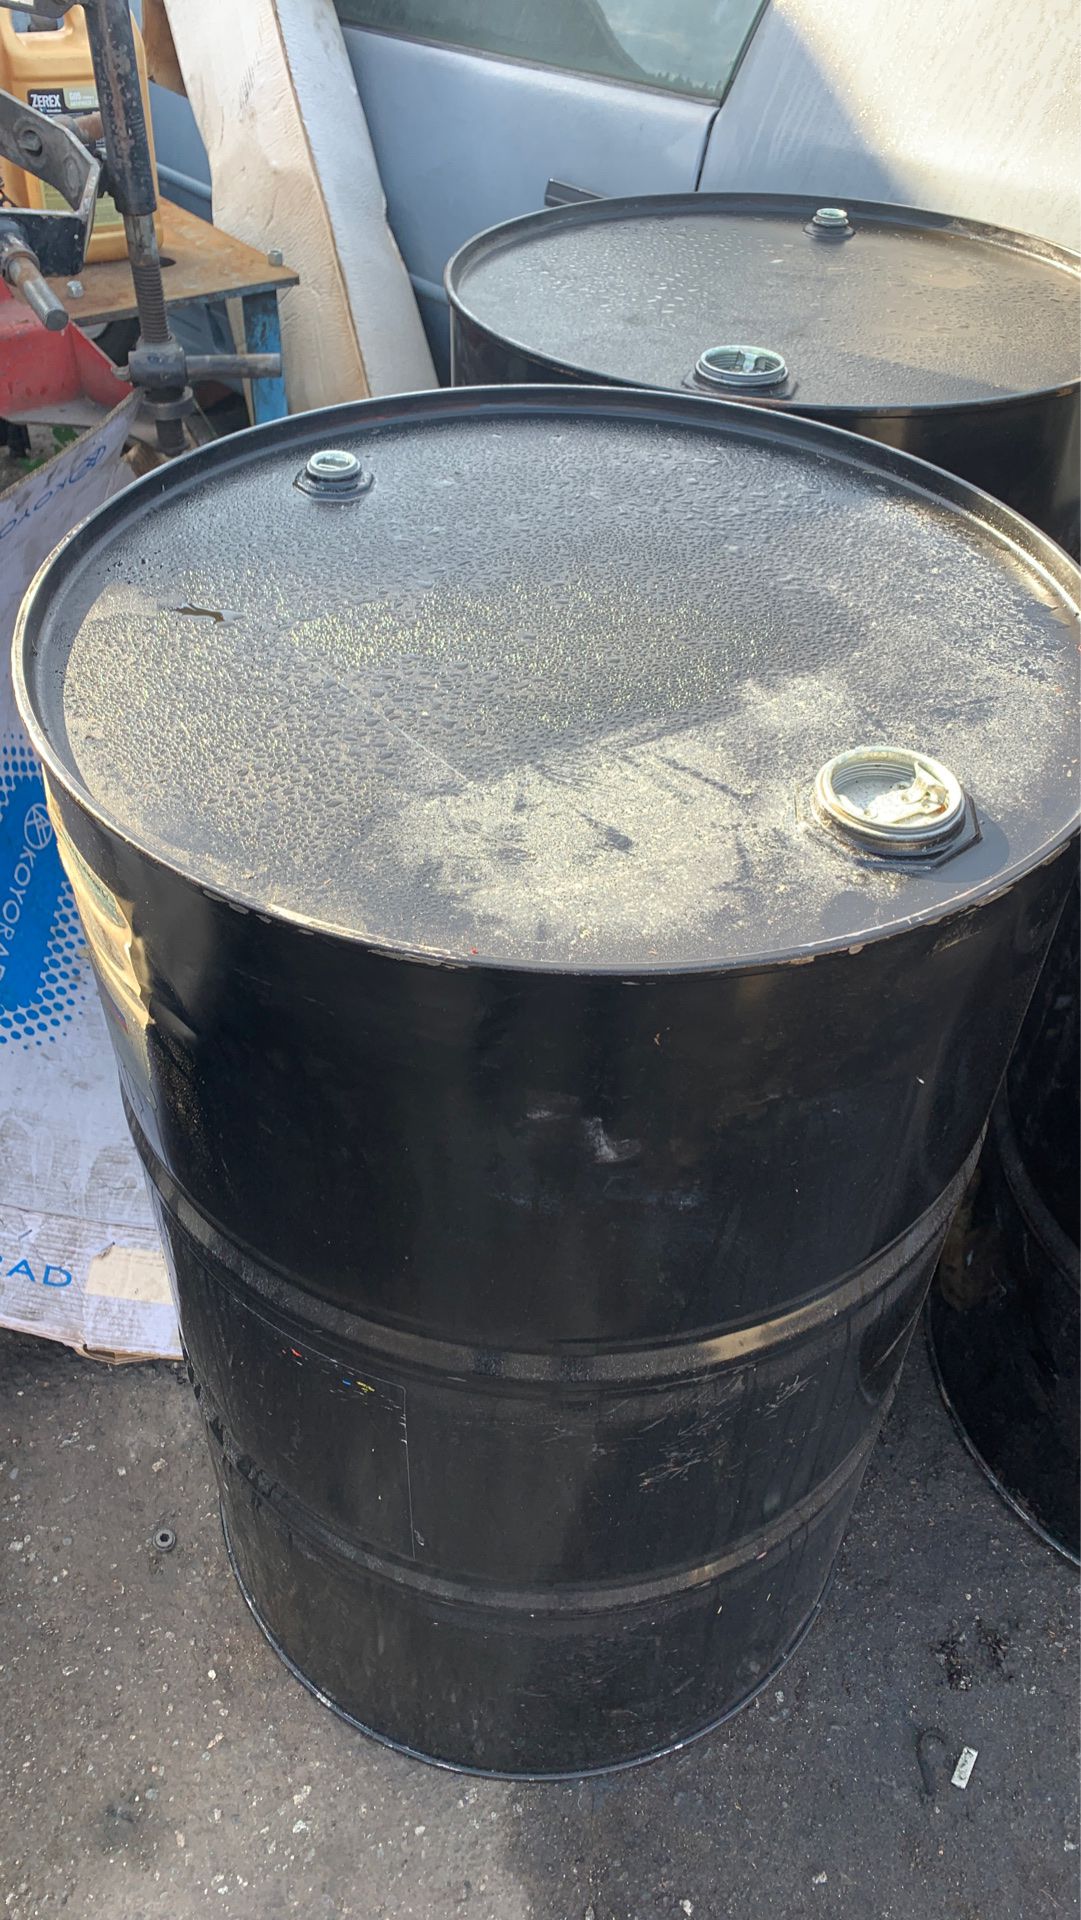 Used 55 gallon drums